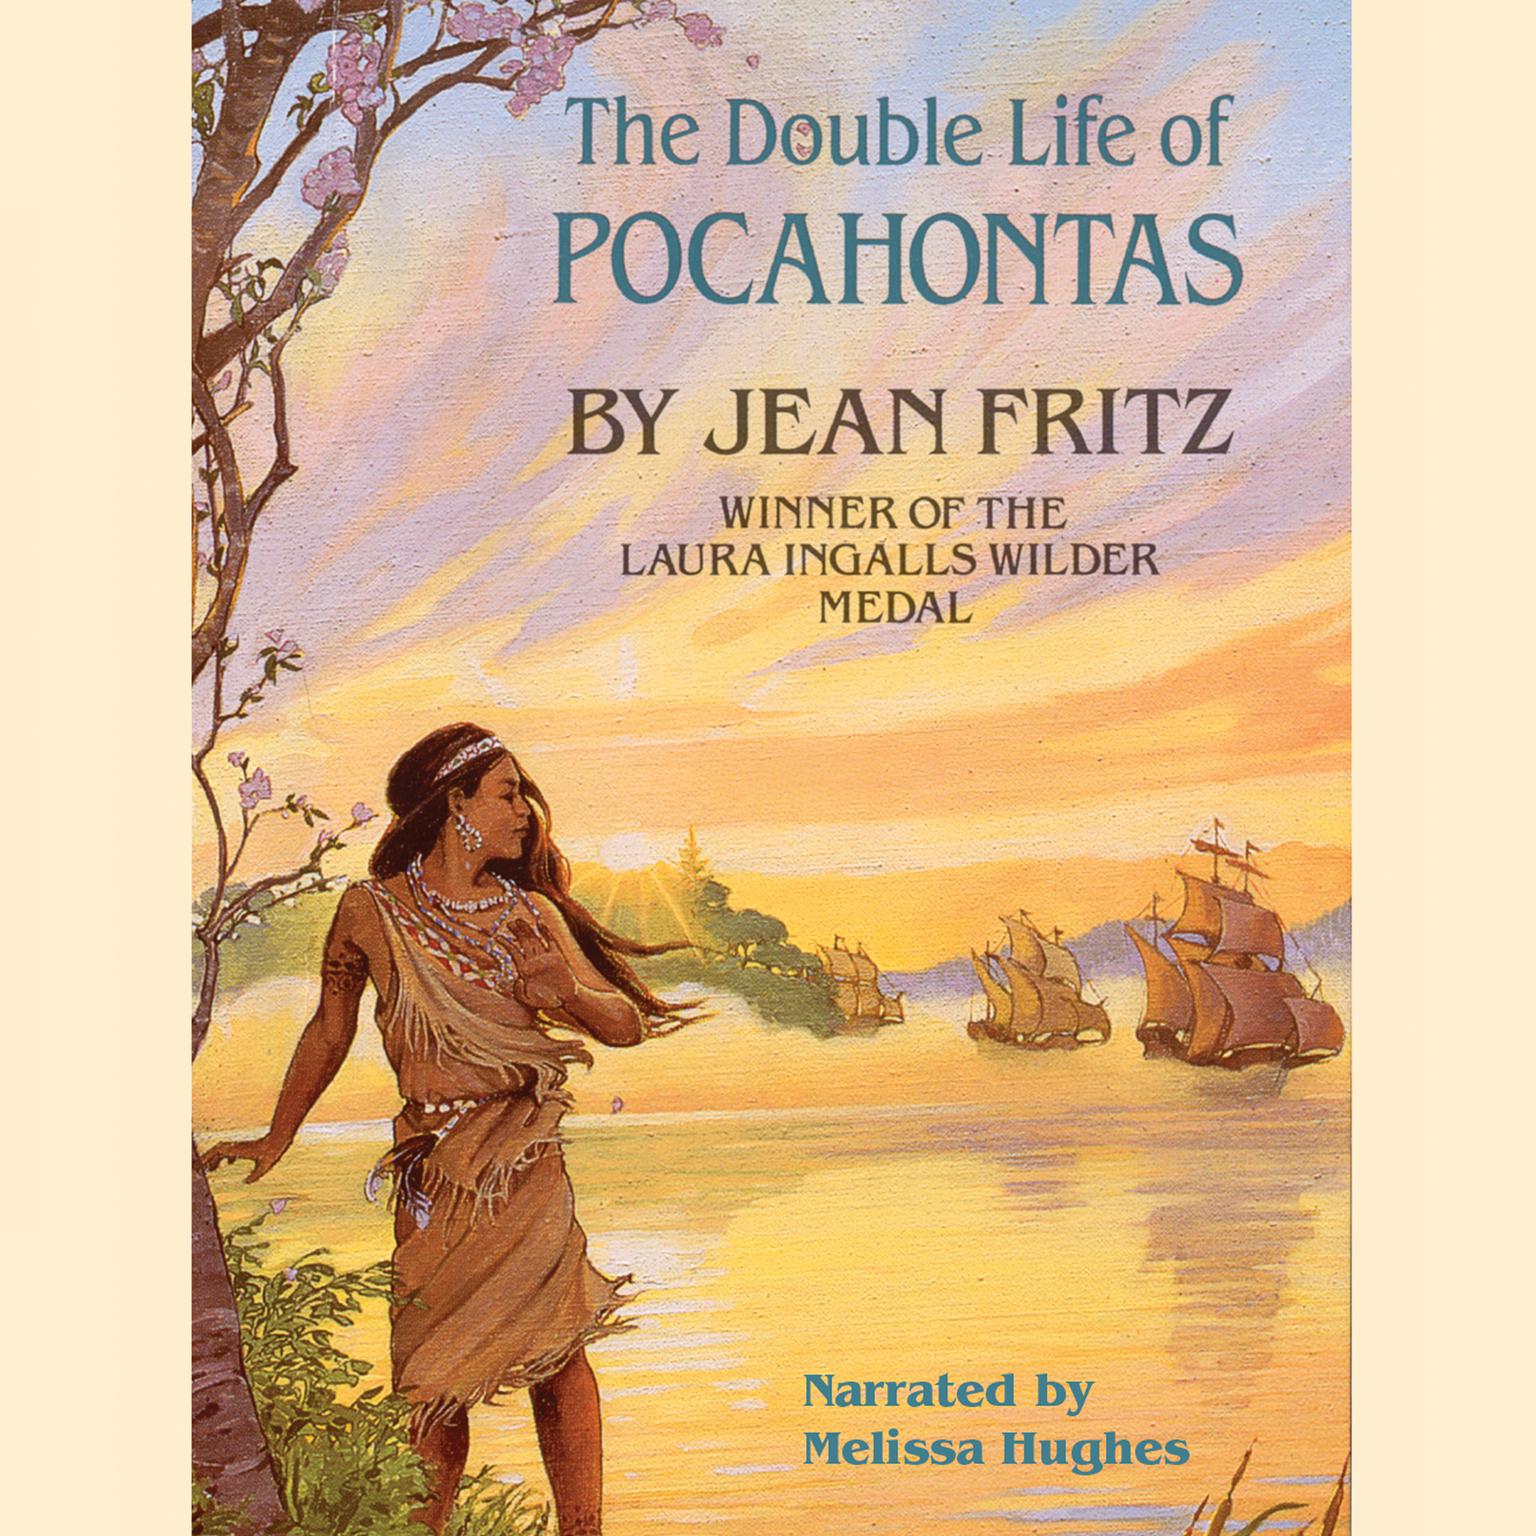 The Double Life of Pocahontas Audiobook, by Jean Fritz